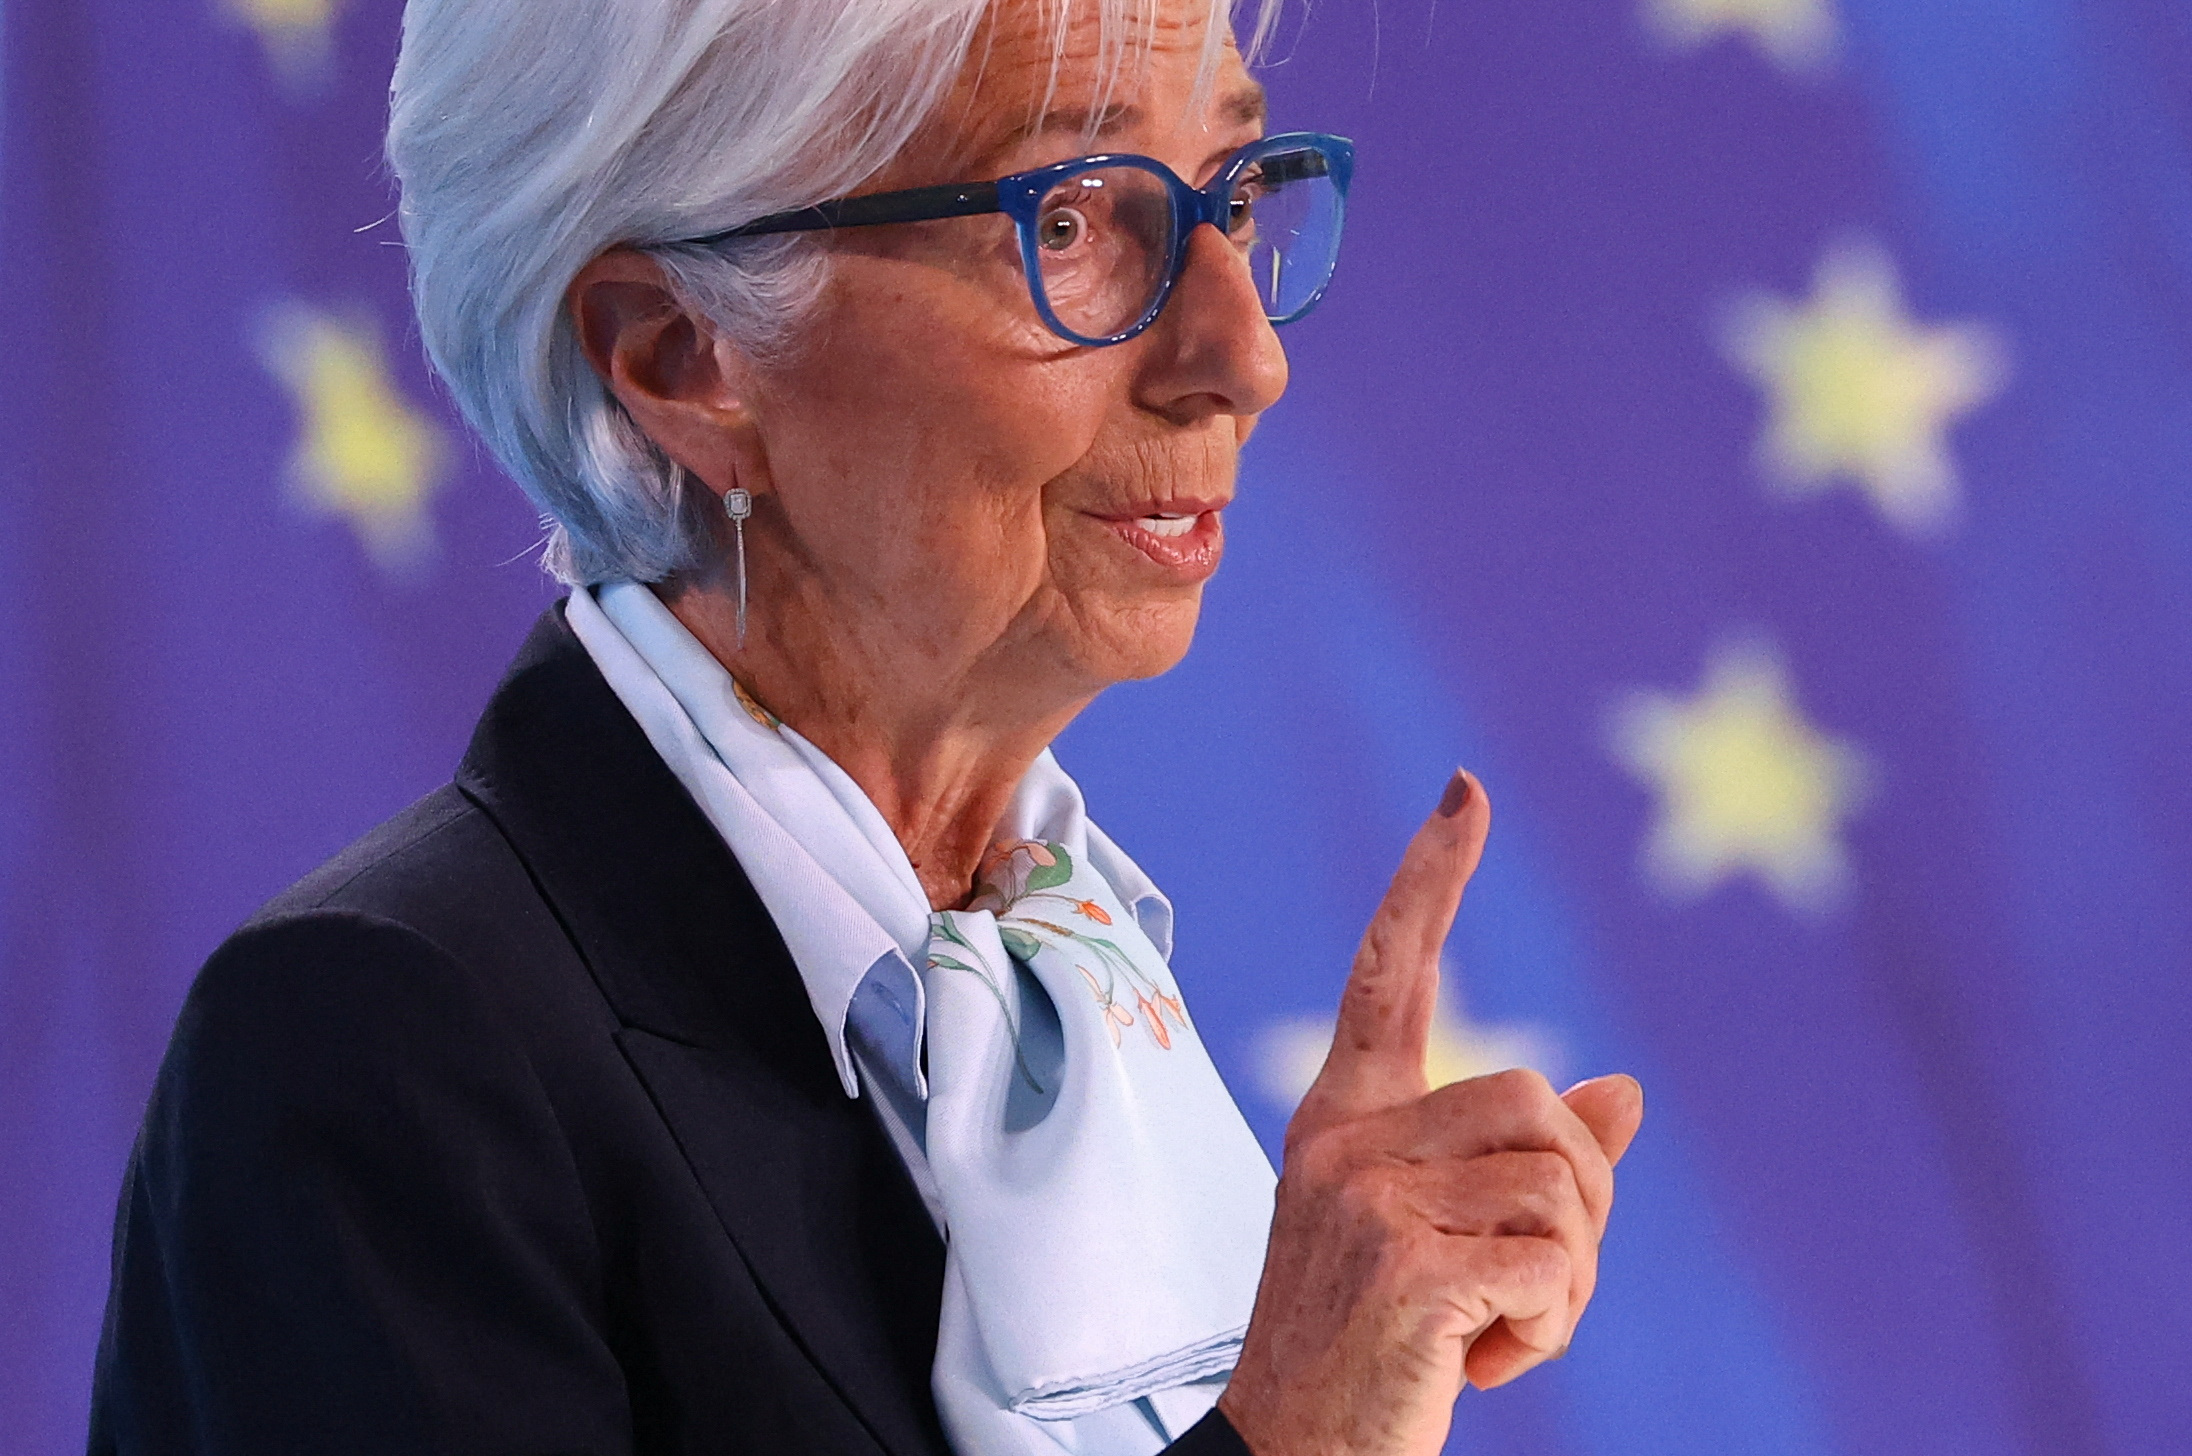 ECB president Lagarde speaks following the Governing Council's monetary policy meeting, in Frankfurt